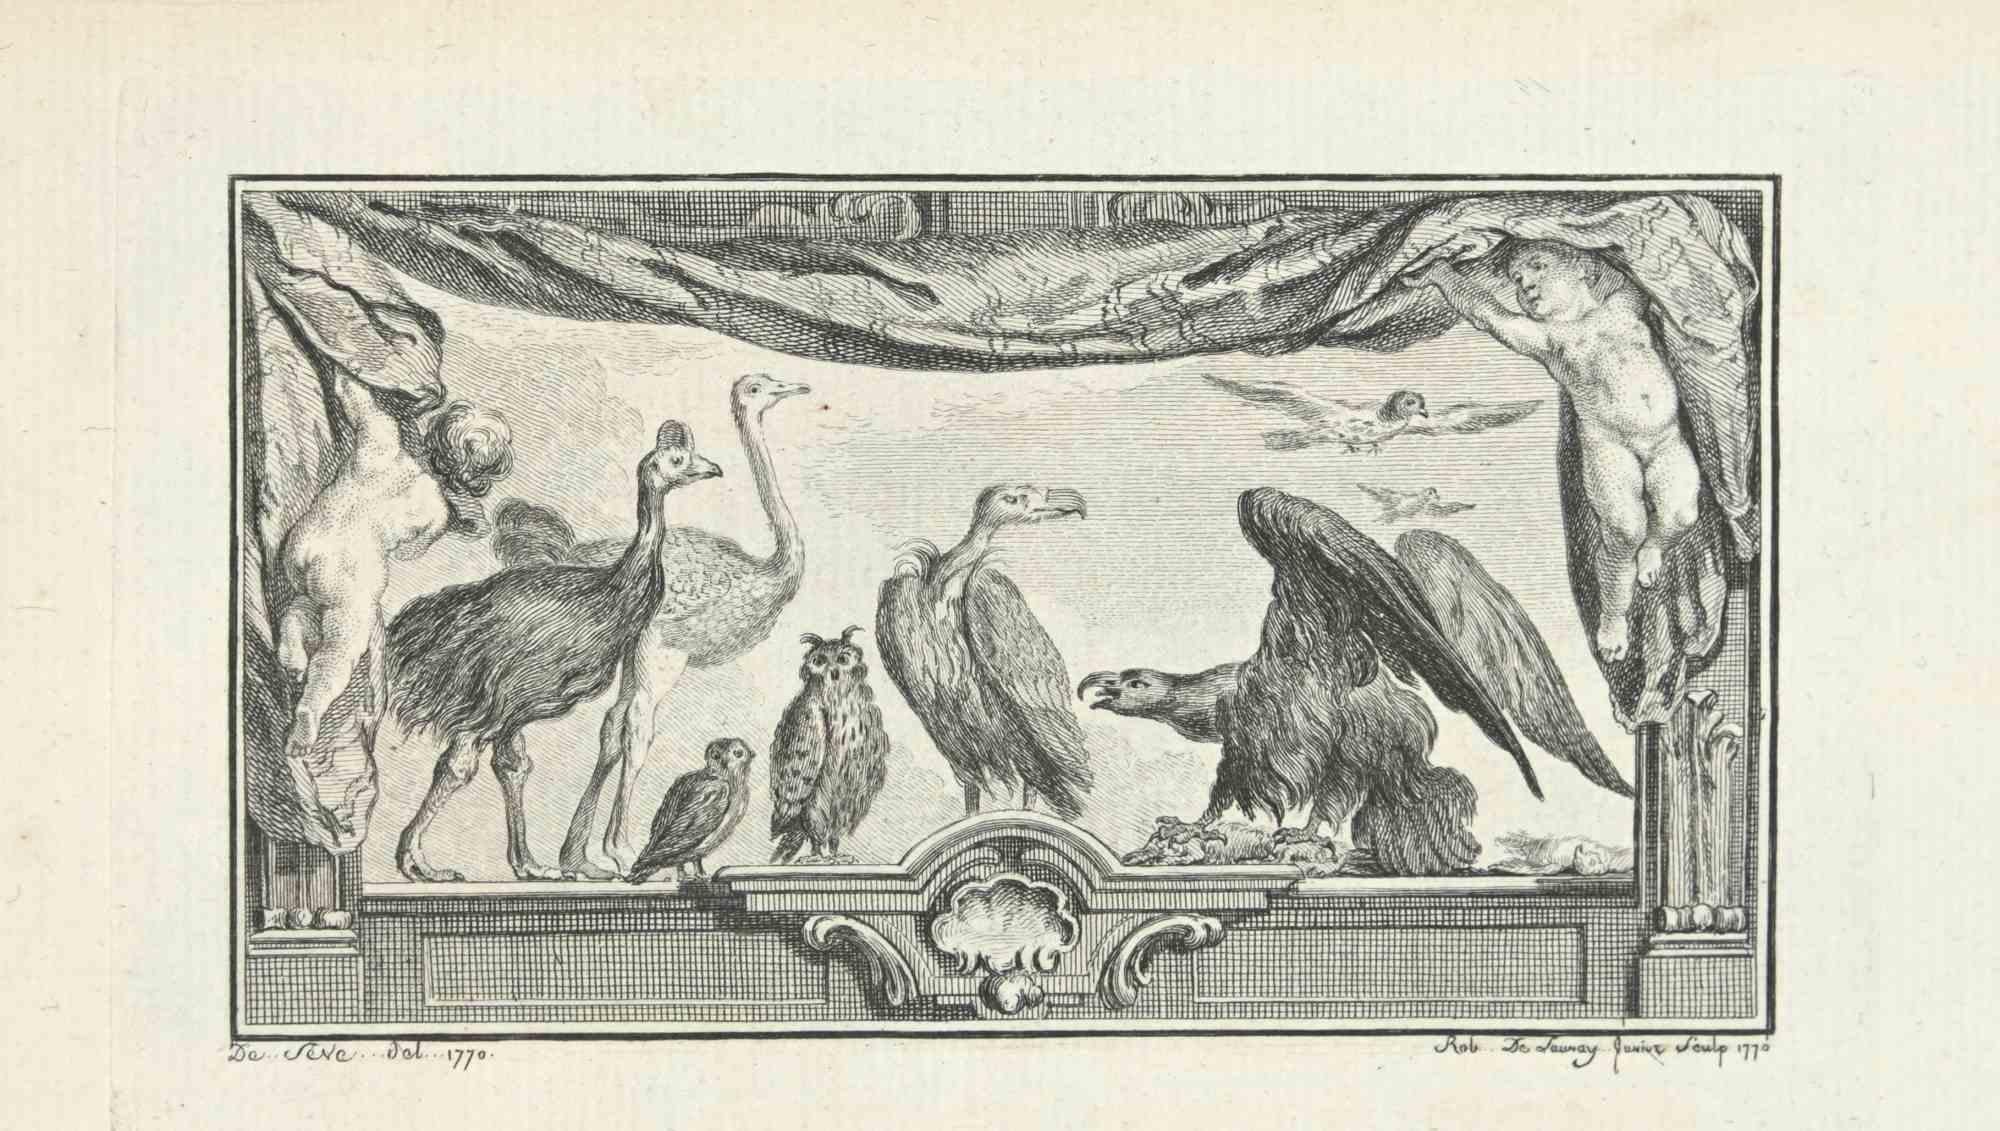 Birds is an etching realized in 1771 by Robert De Launay.

The Artwork is depicted through confident strokes in aa well balanced composition.

Good conditions.
 
